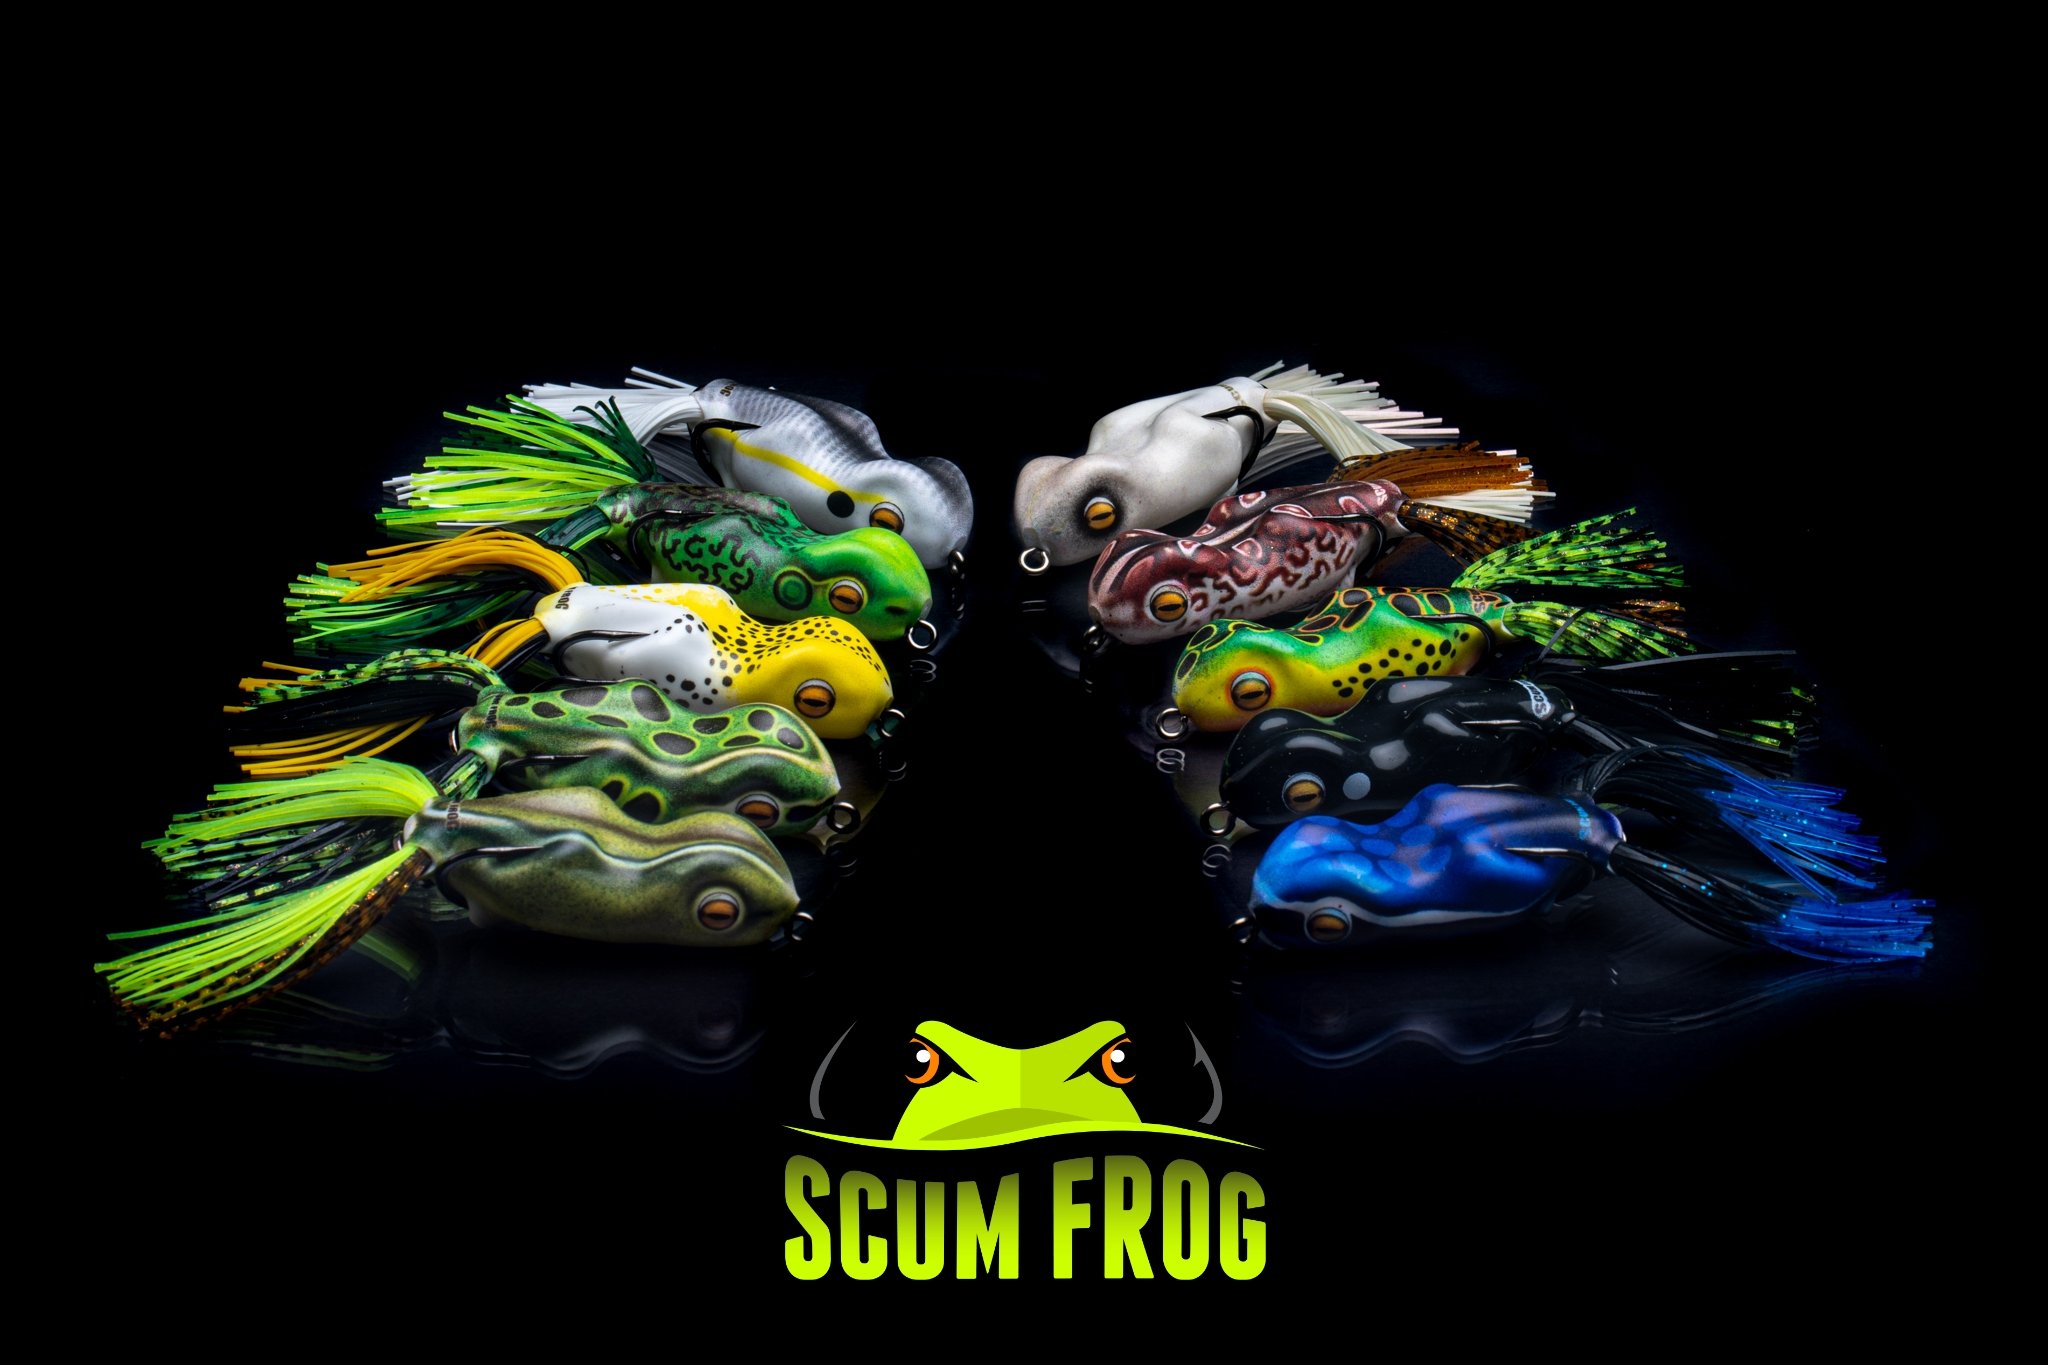 All New Realistic Scum Frog Painted Trophy Series Meets Angler Demands –  Anglers Channel